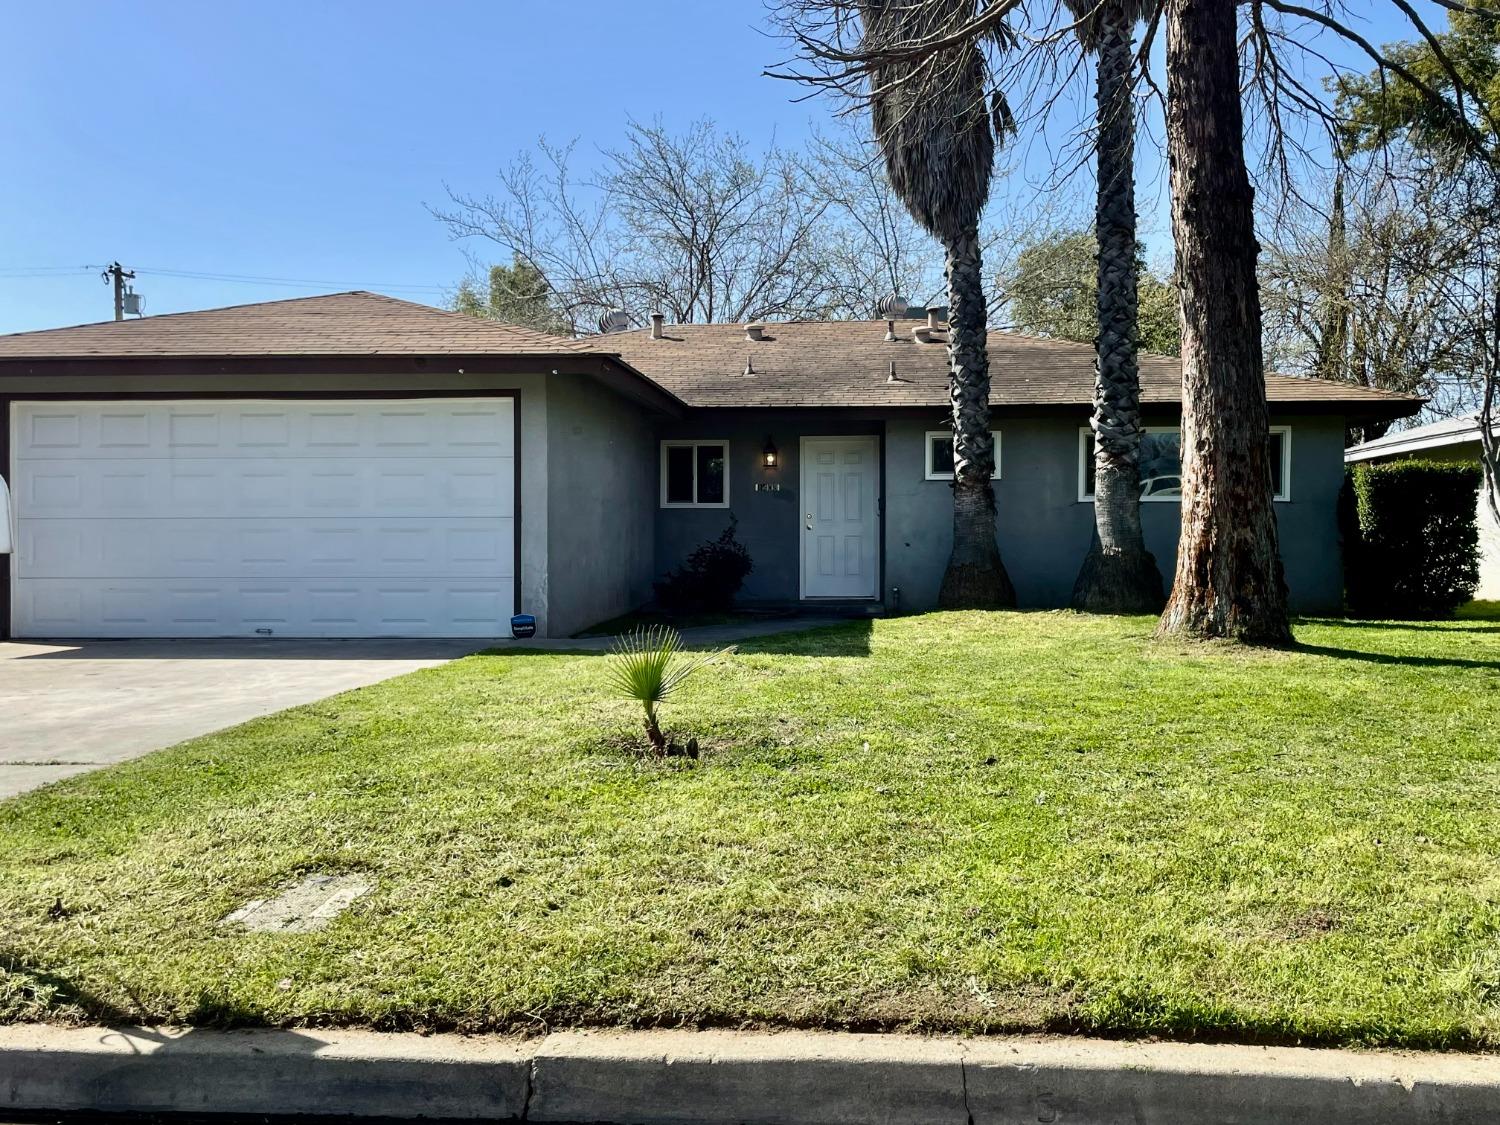 Photo of 1408 Merced St in Madera, CA